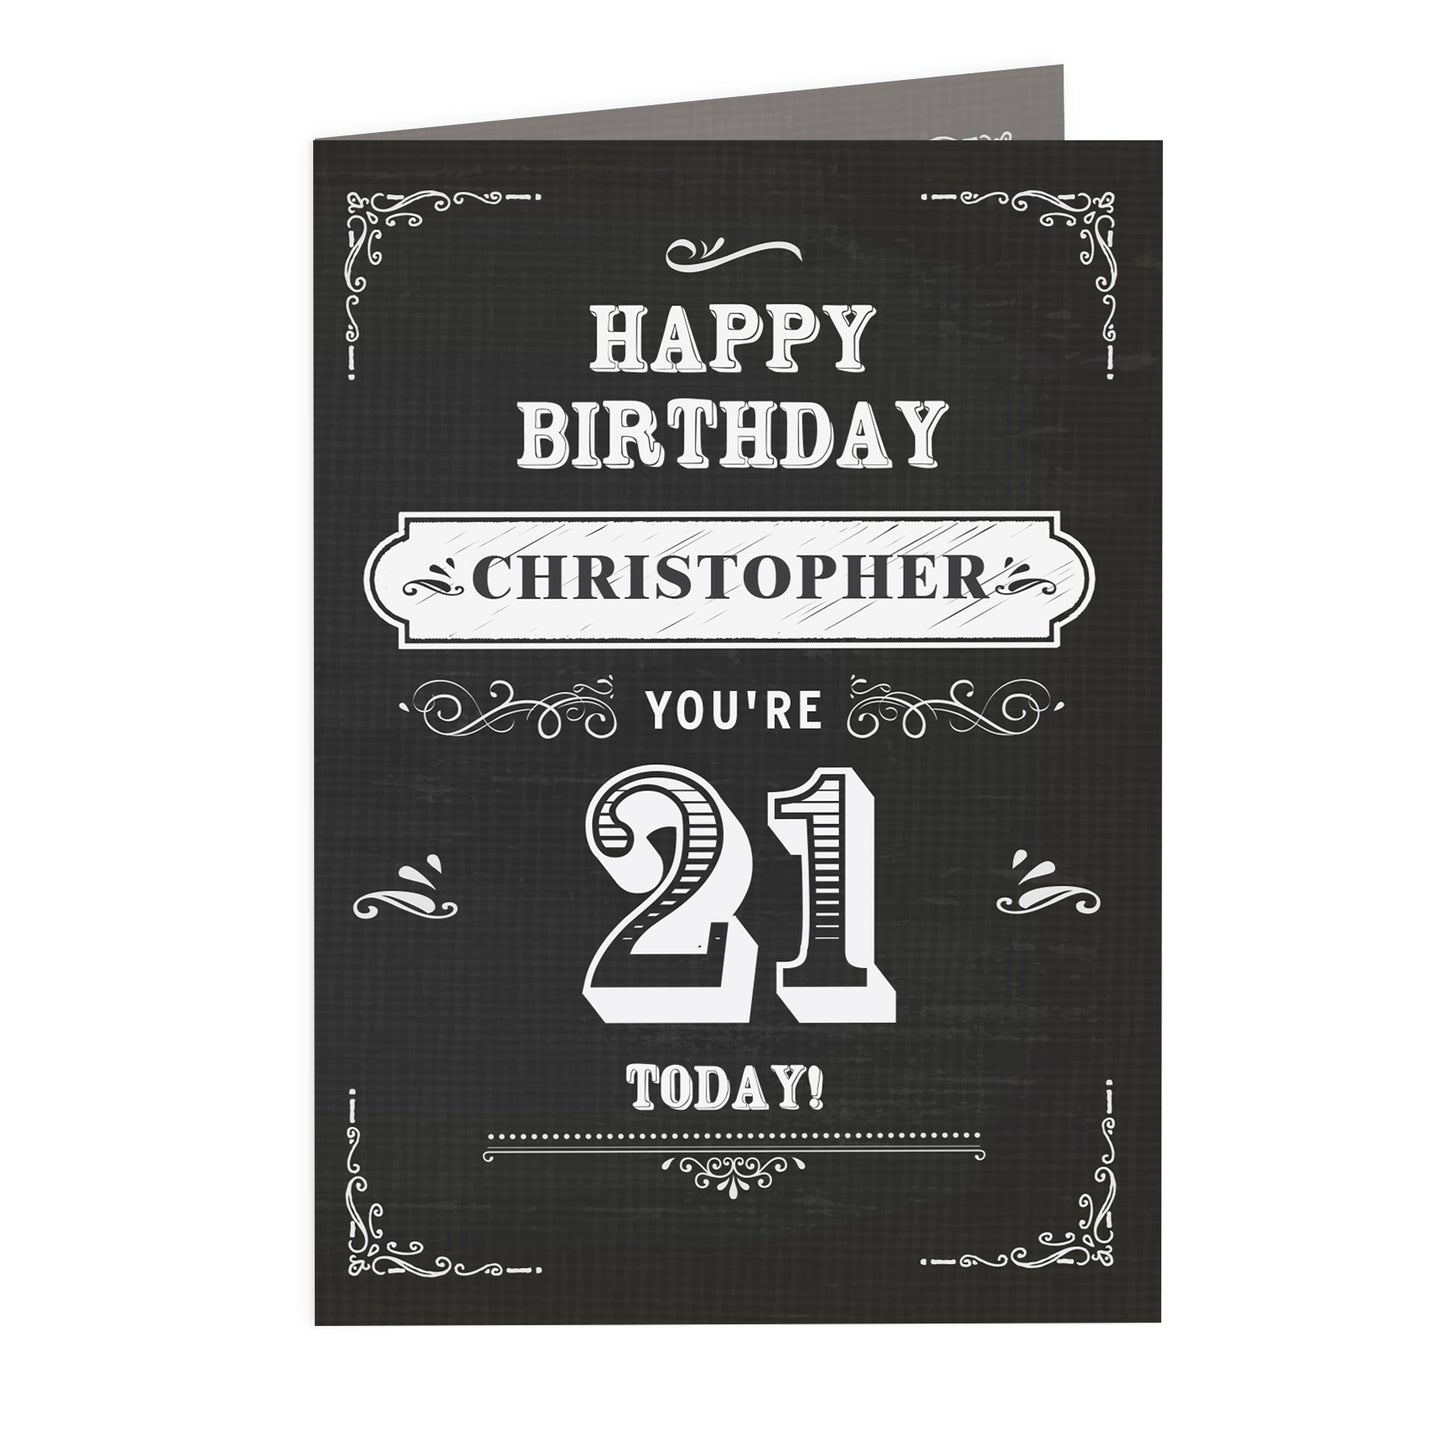 Personalised Vintage Typography Birthday Card Add Any Age & Name - Personalise It!